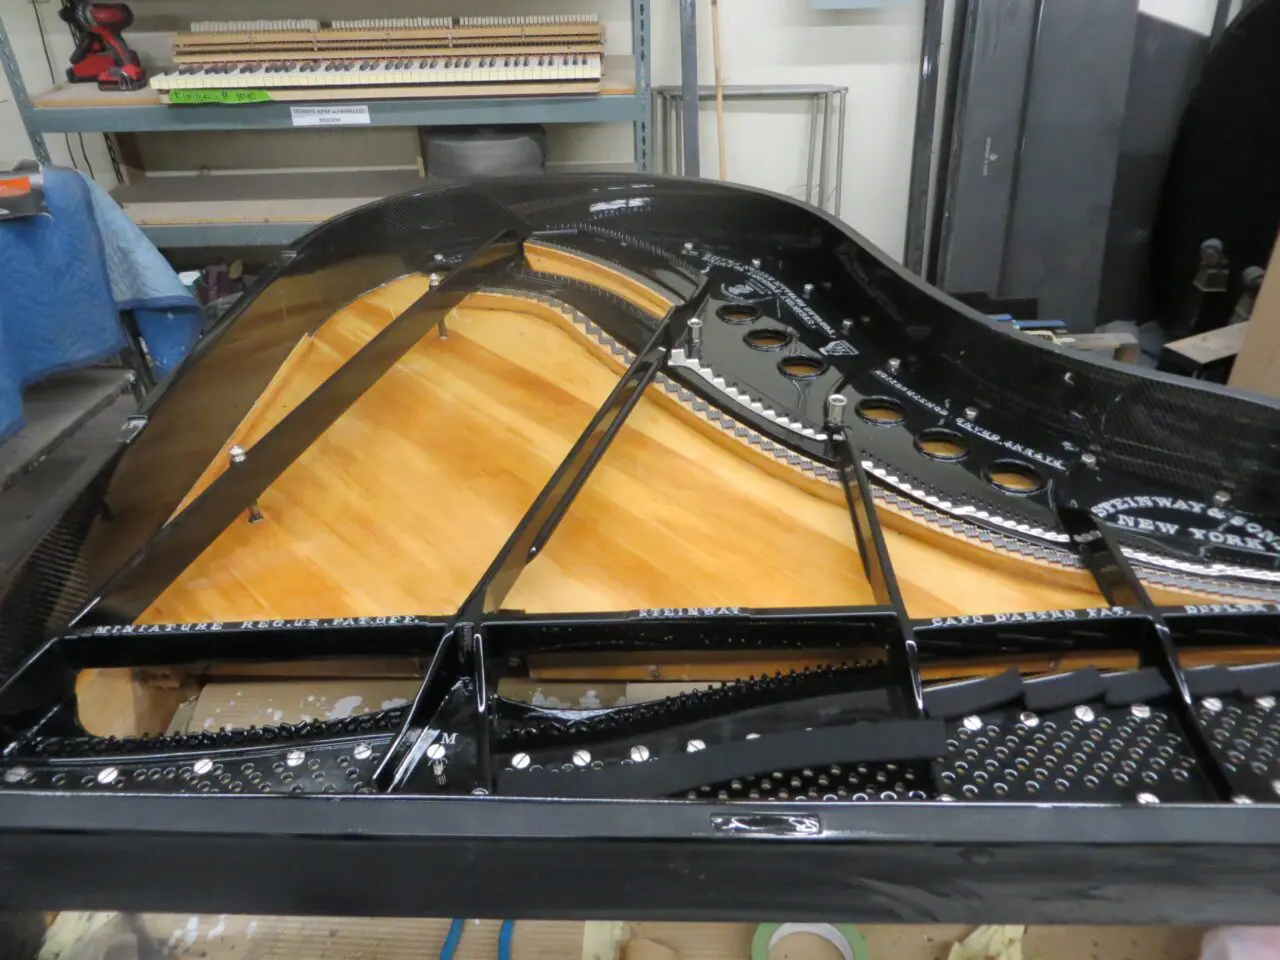 A piano that is being worked on.